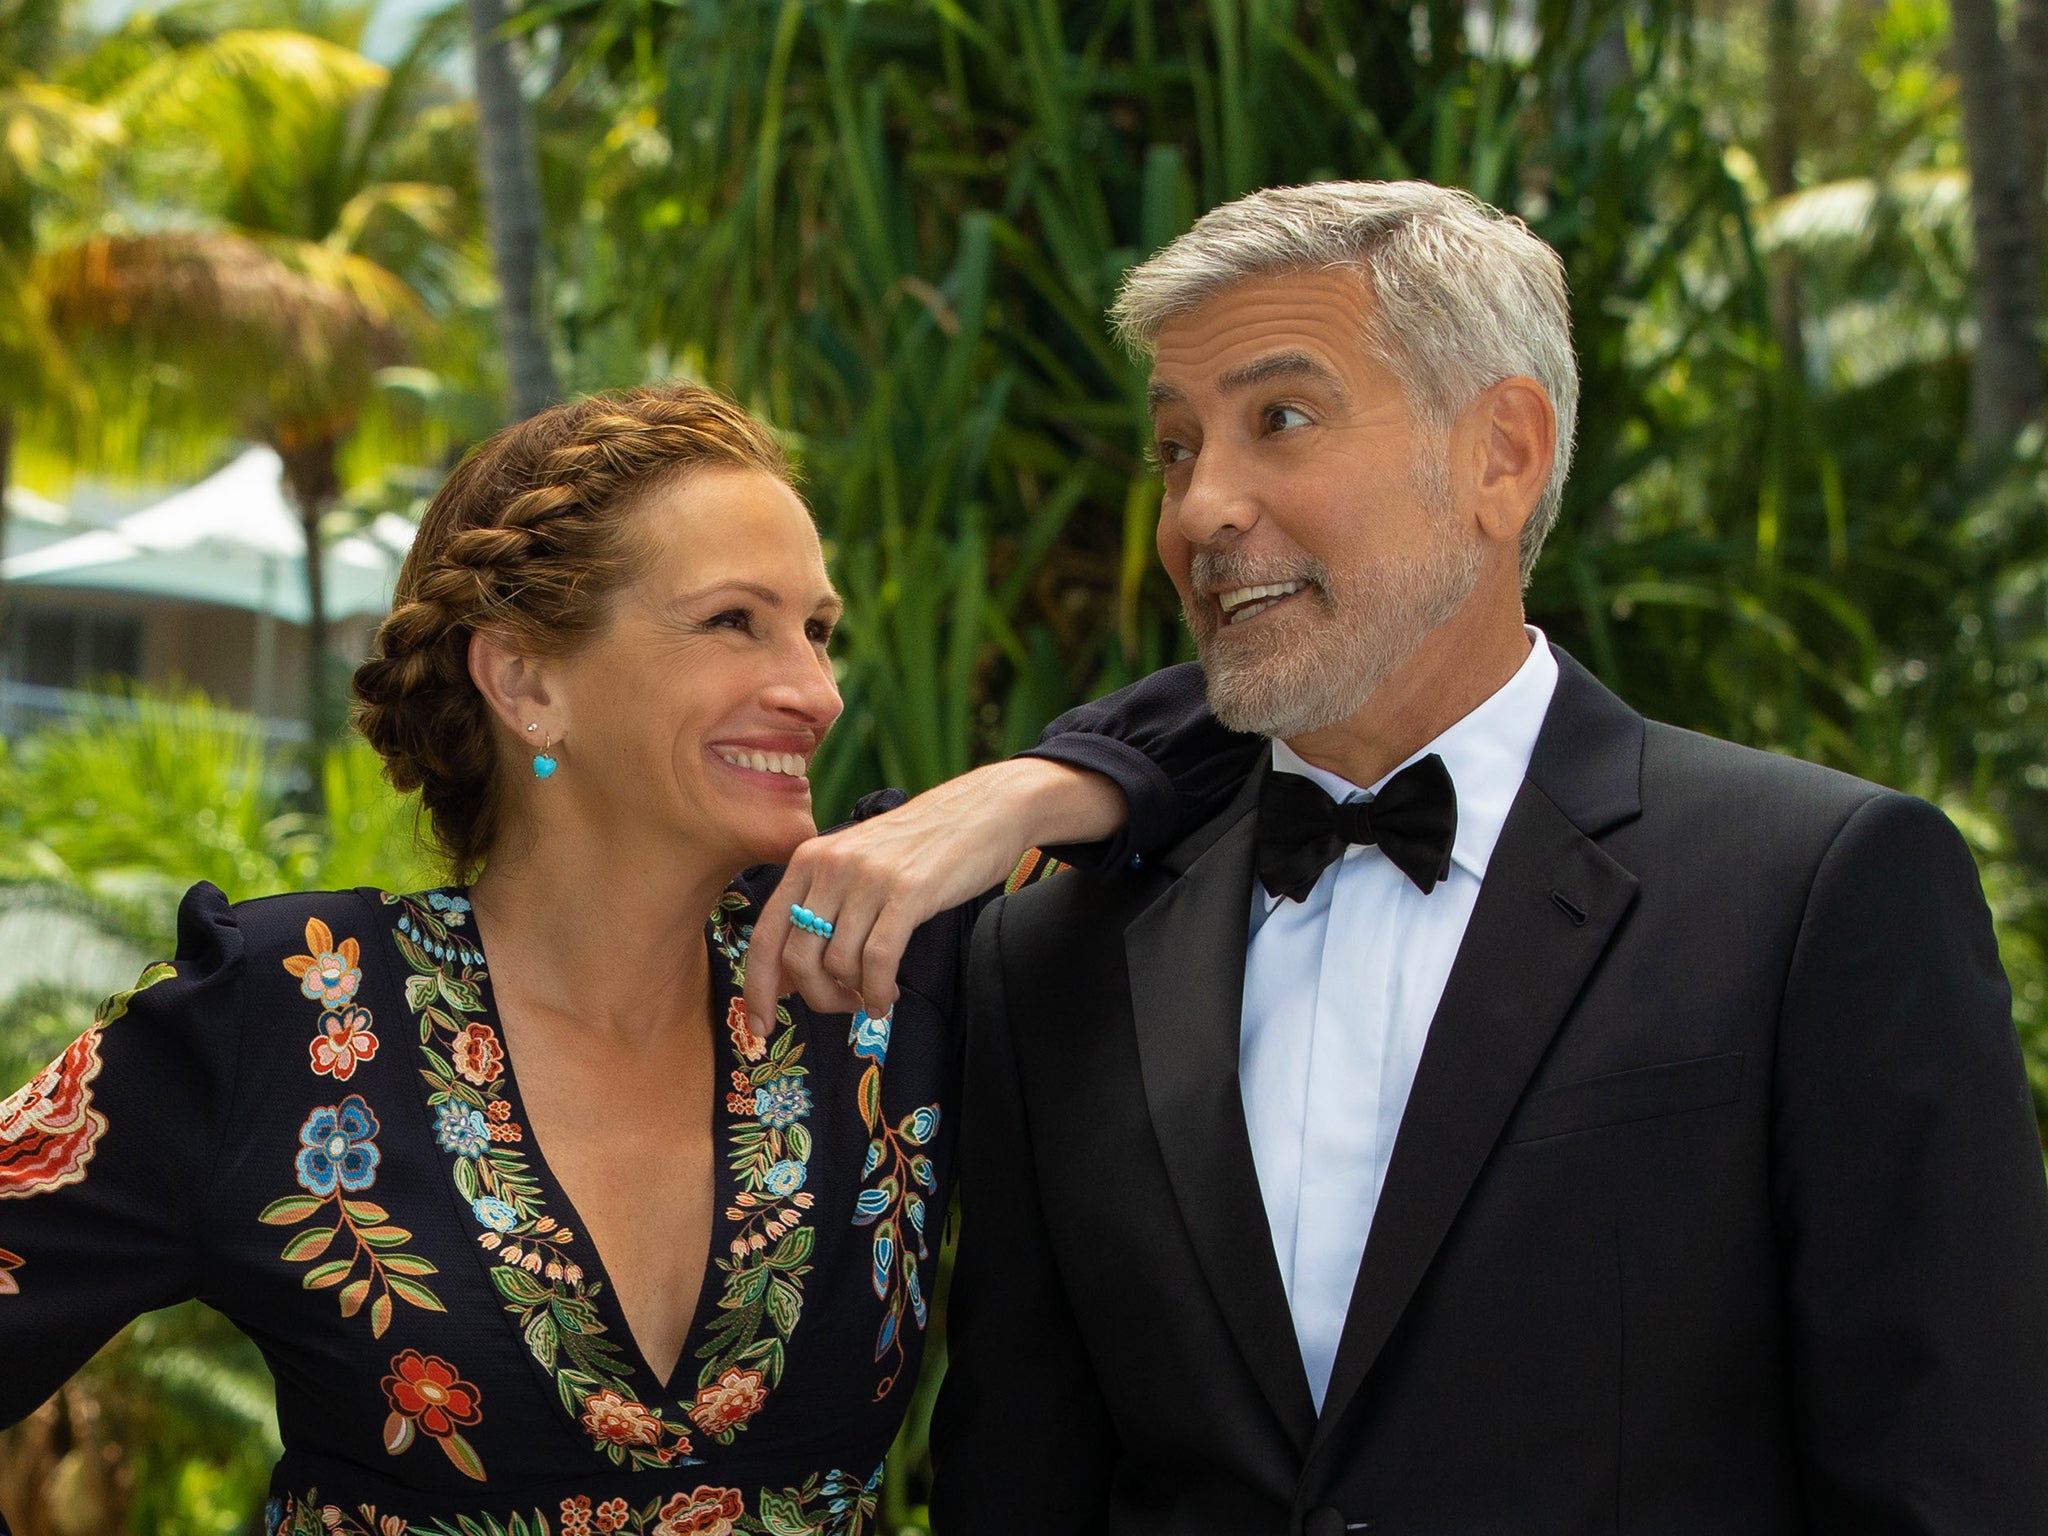 Julia Roberts and George Clooney in 'Ticket to Paradise'